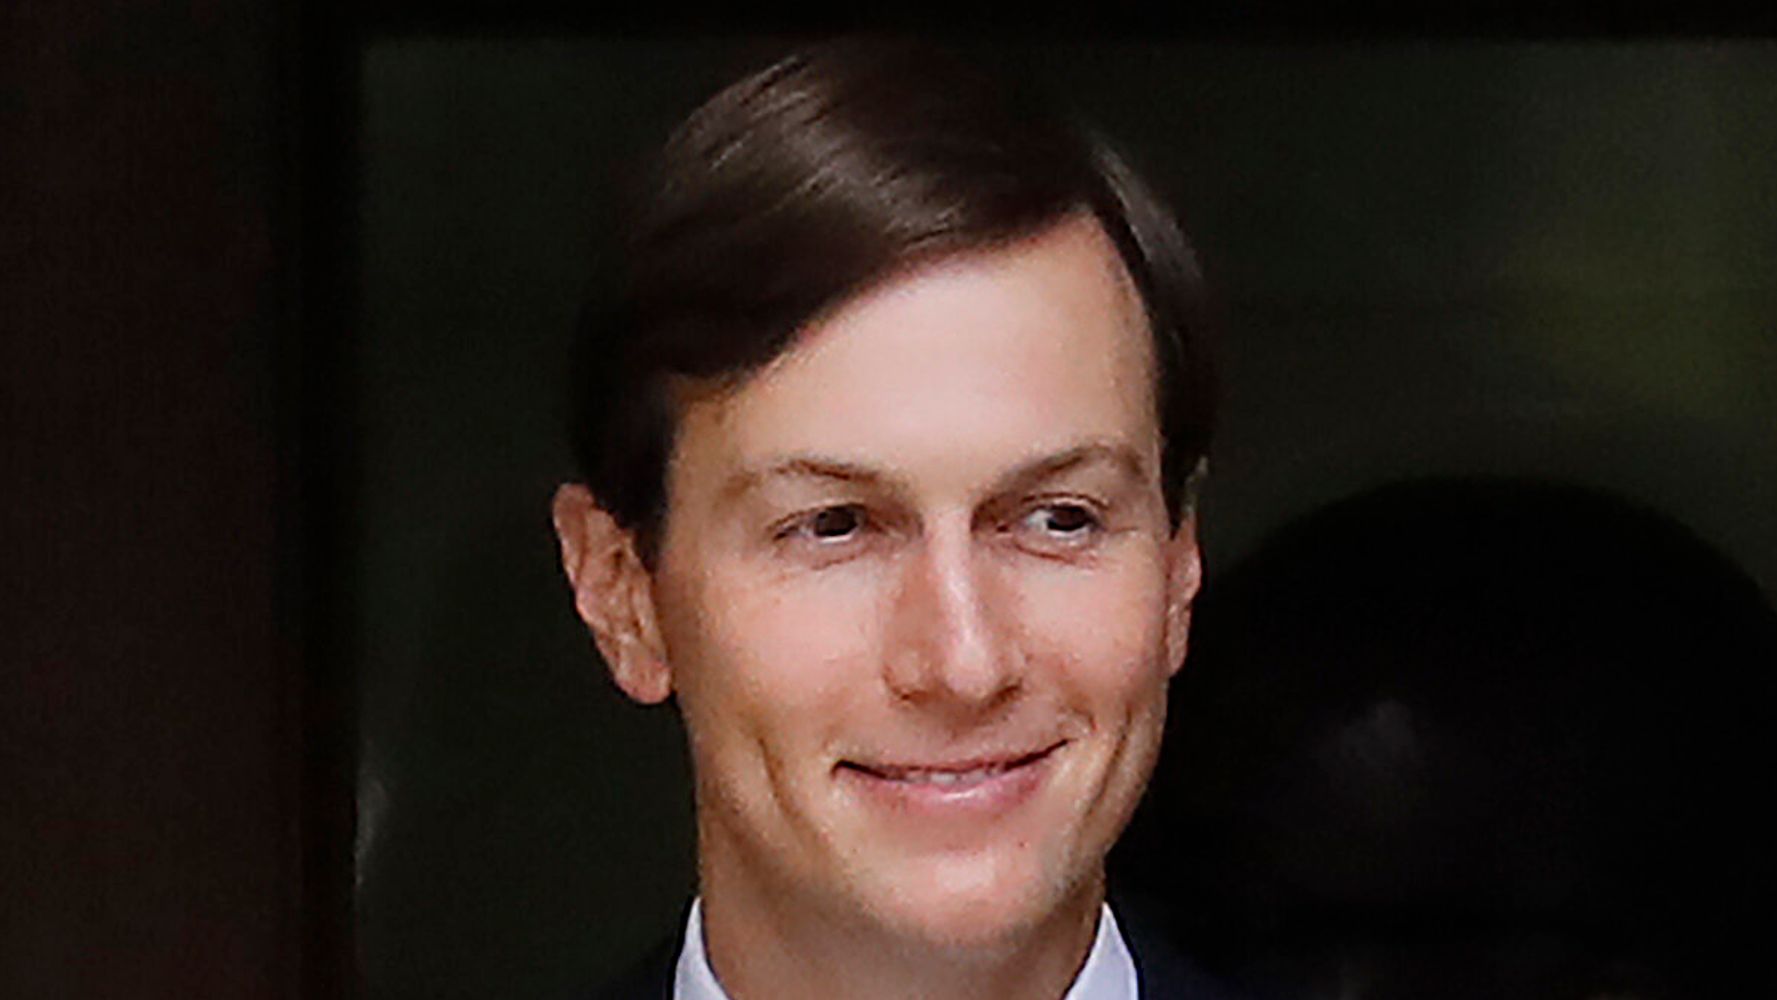 Saudis Poised To Invest In Jared Kushner Fund After Cozy Trump White House Ties: Report | HuffPost Latest News